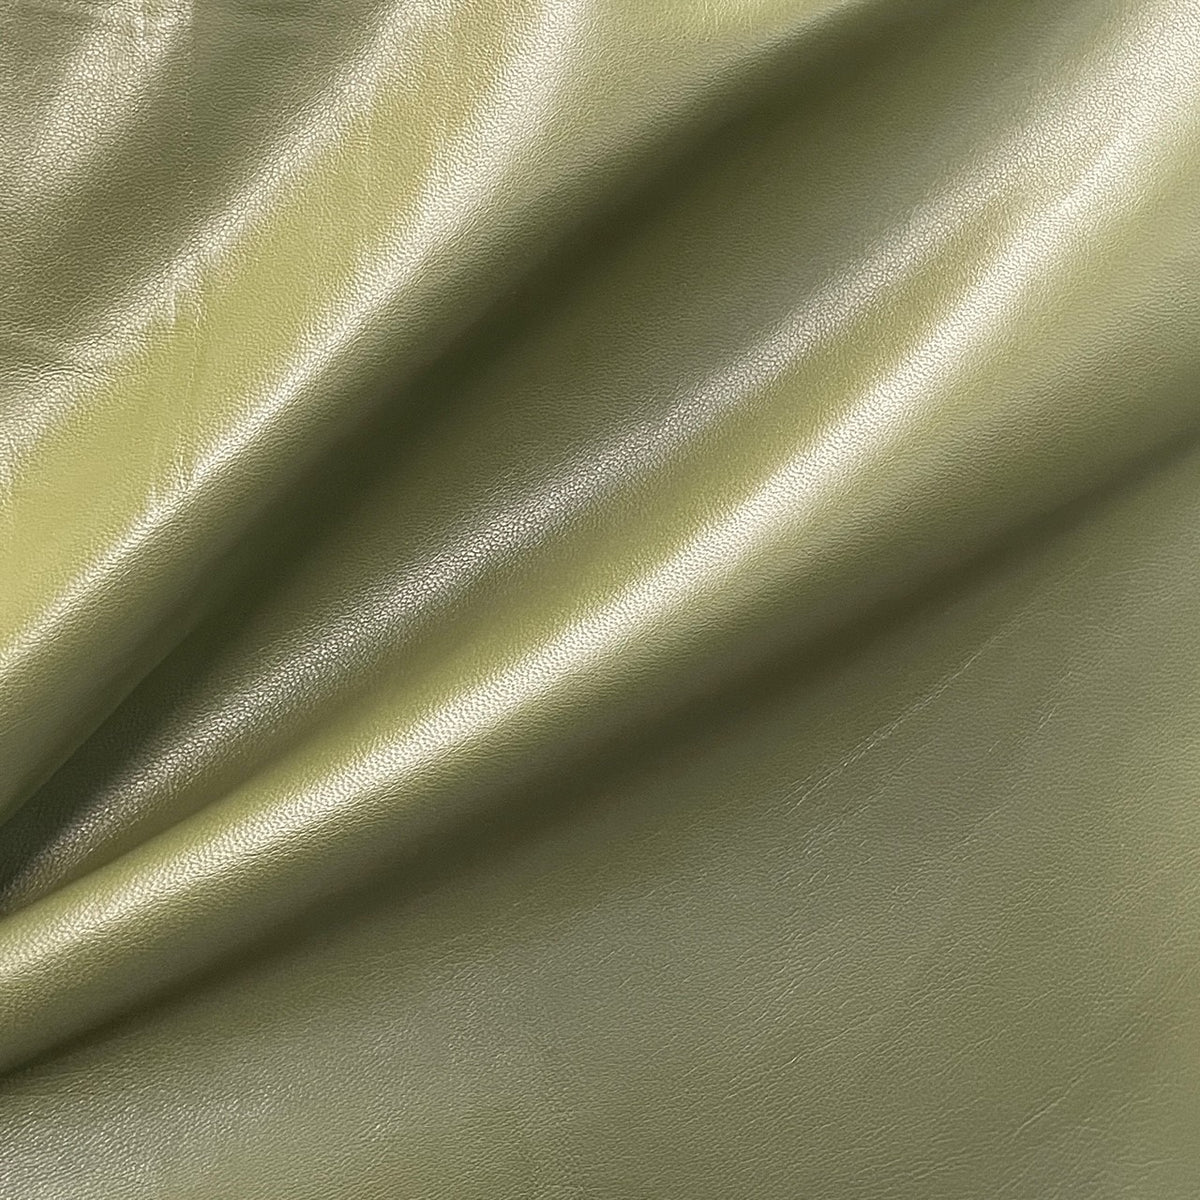 NEW Lamb Skin Premium | Olive Branch | 0.7mm | 9 sq.ft | From $70 ea.